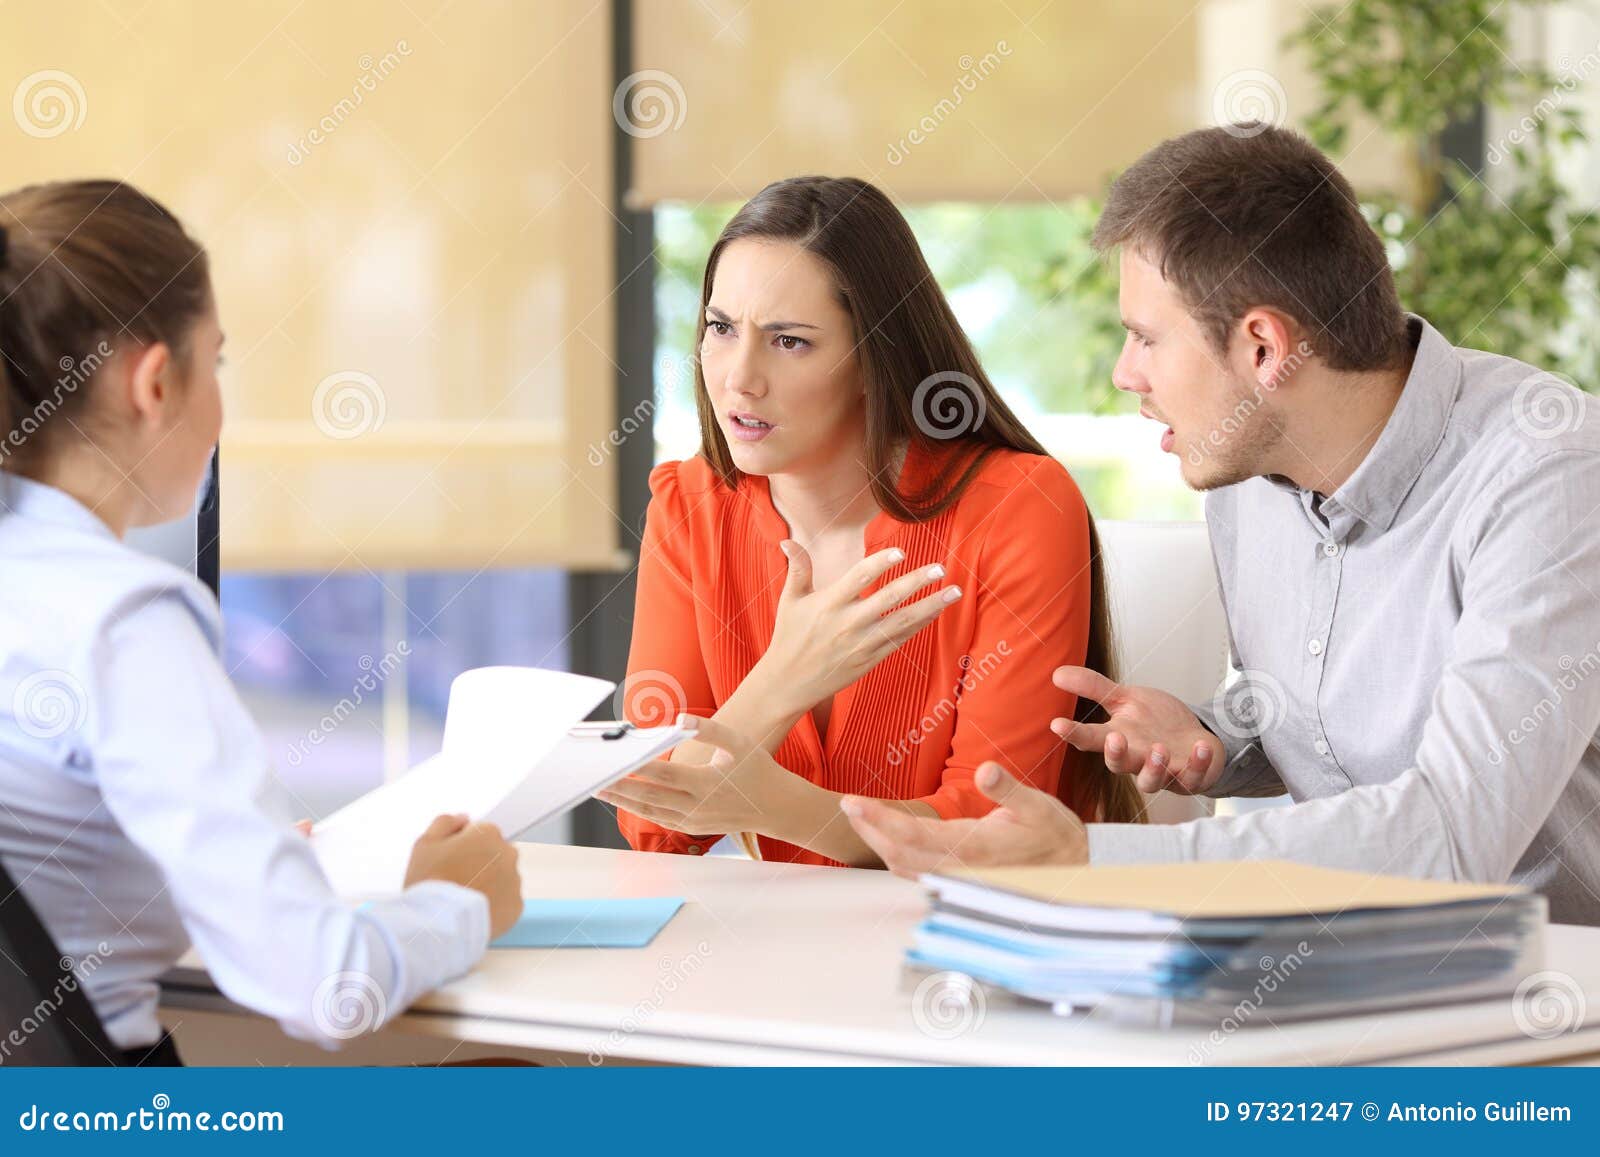 couple arguing in a marriage consultory